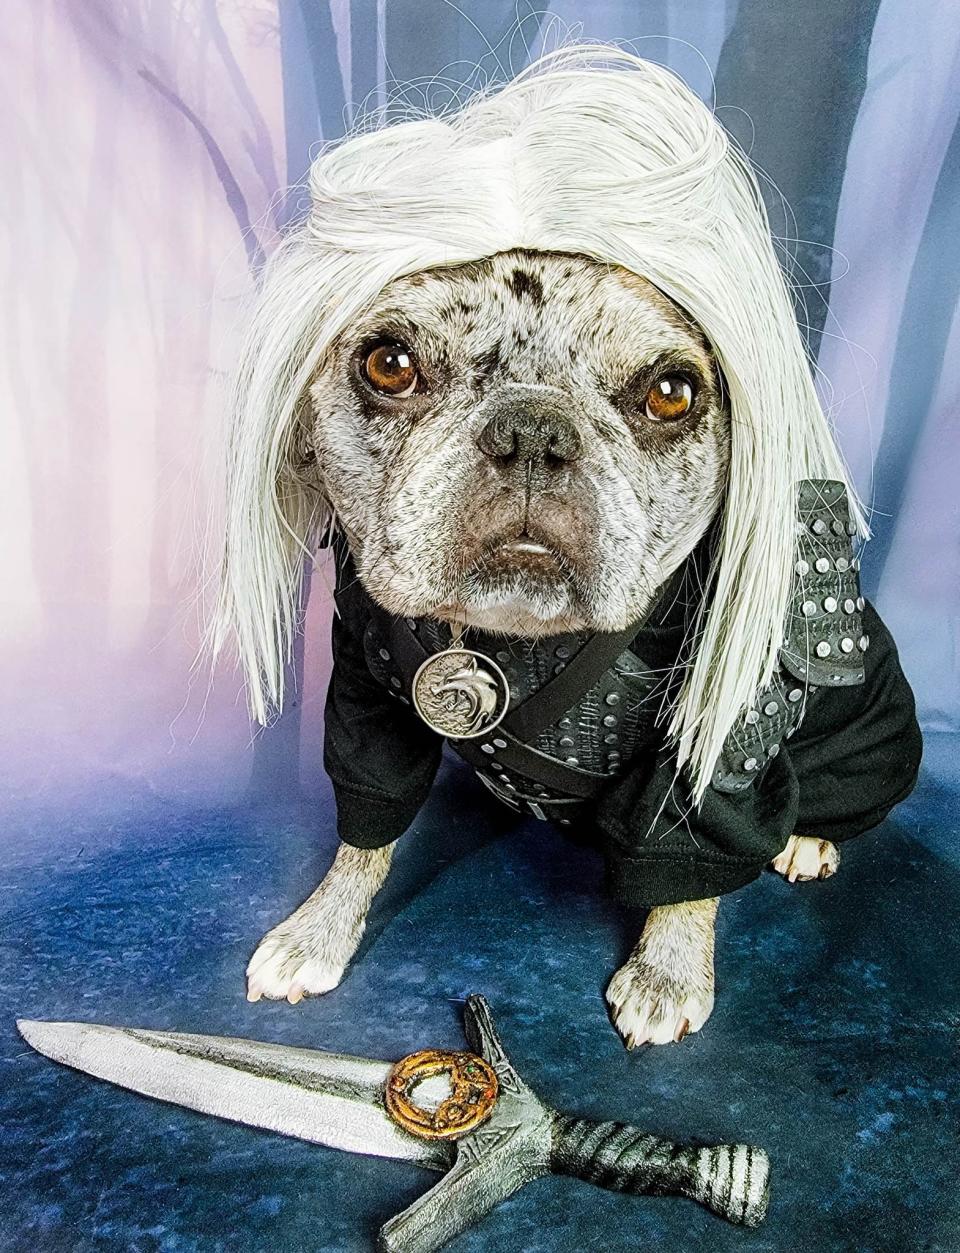 Rory the merle French bulldog dressed up as Geralt of Rivia from "The Witcher."